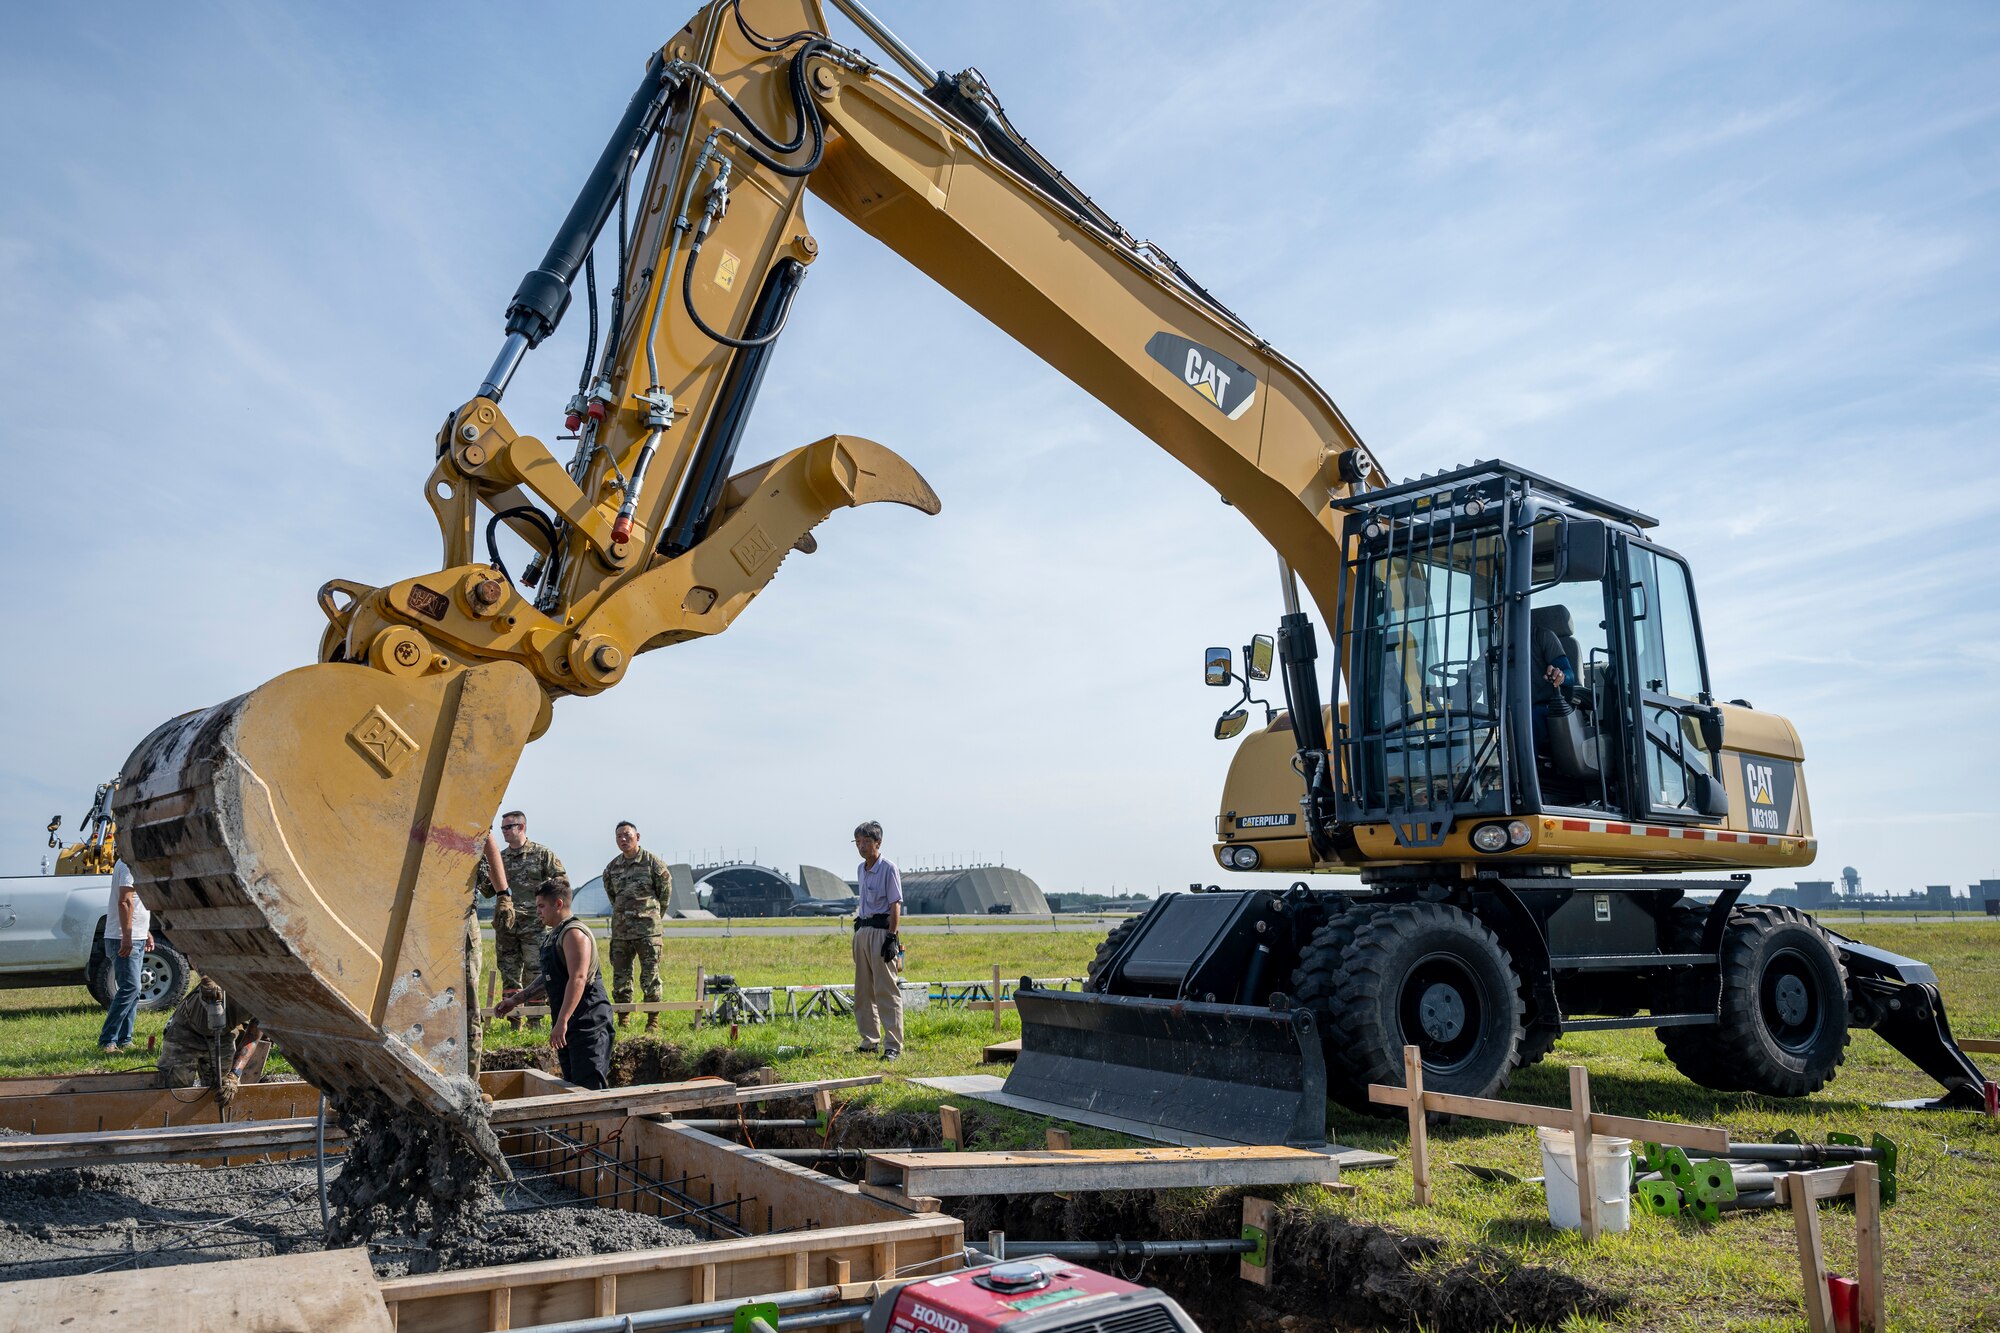 A Japanese man operating an excavator.